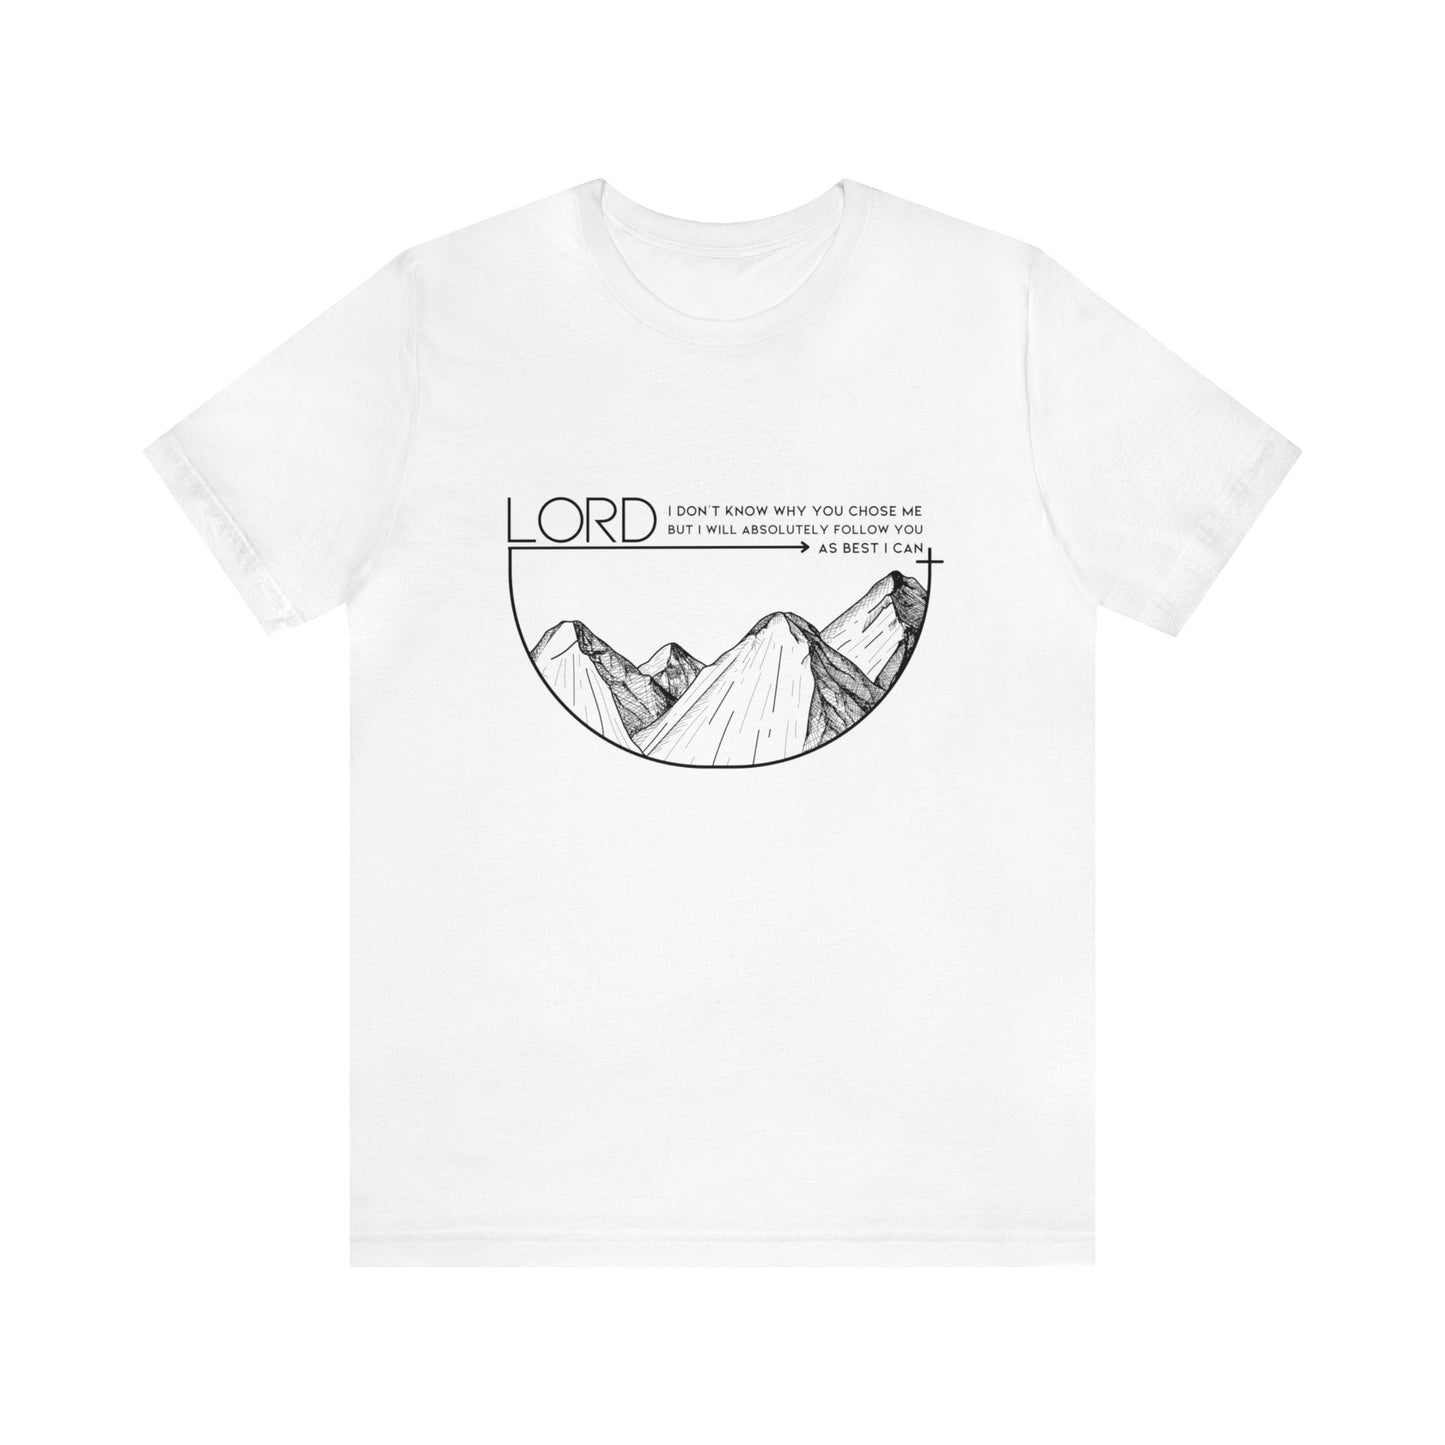 Follow the Lord, Express Delivery, Christian T-shirt for Men and Women